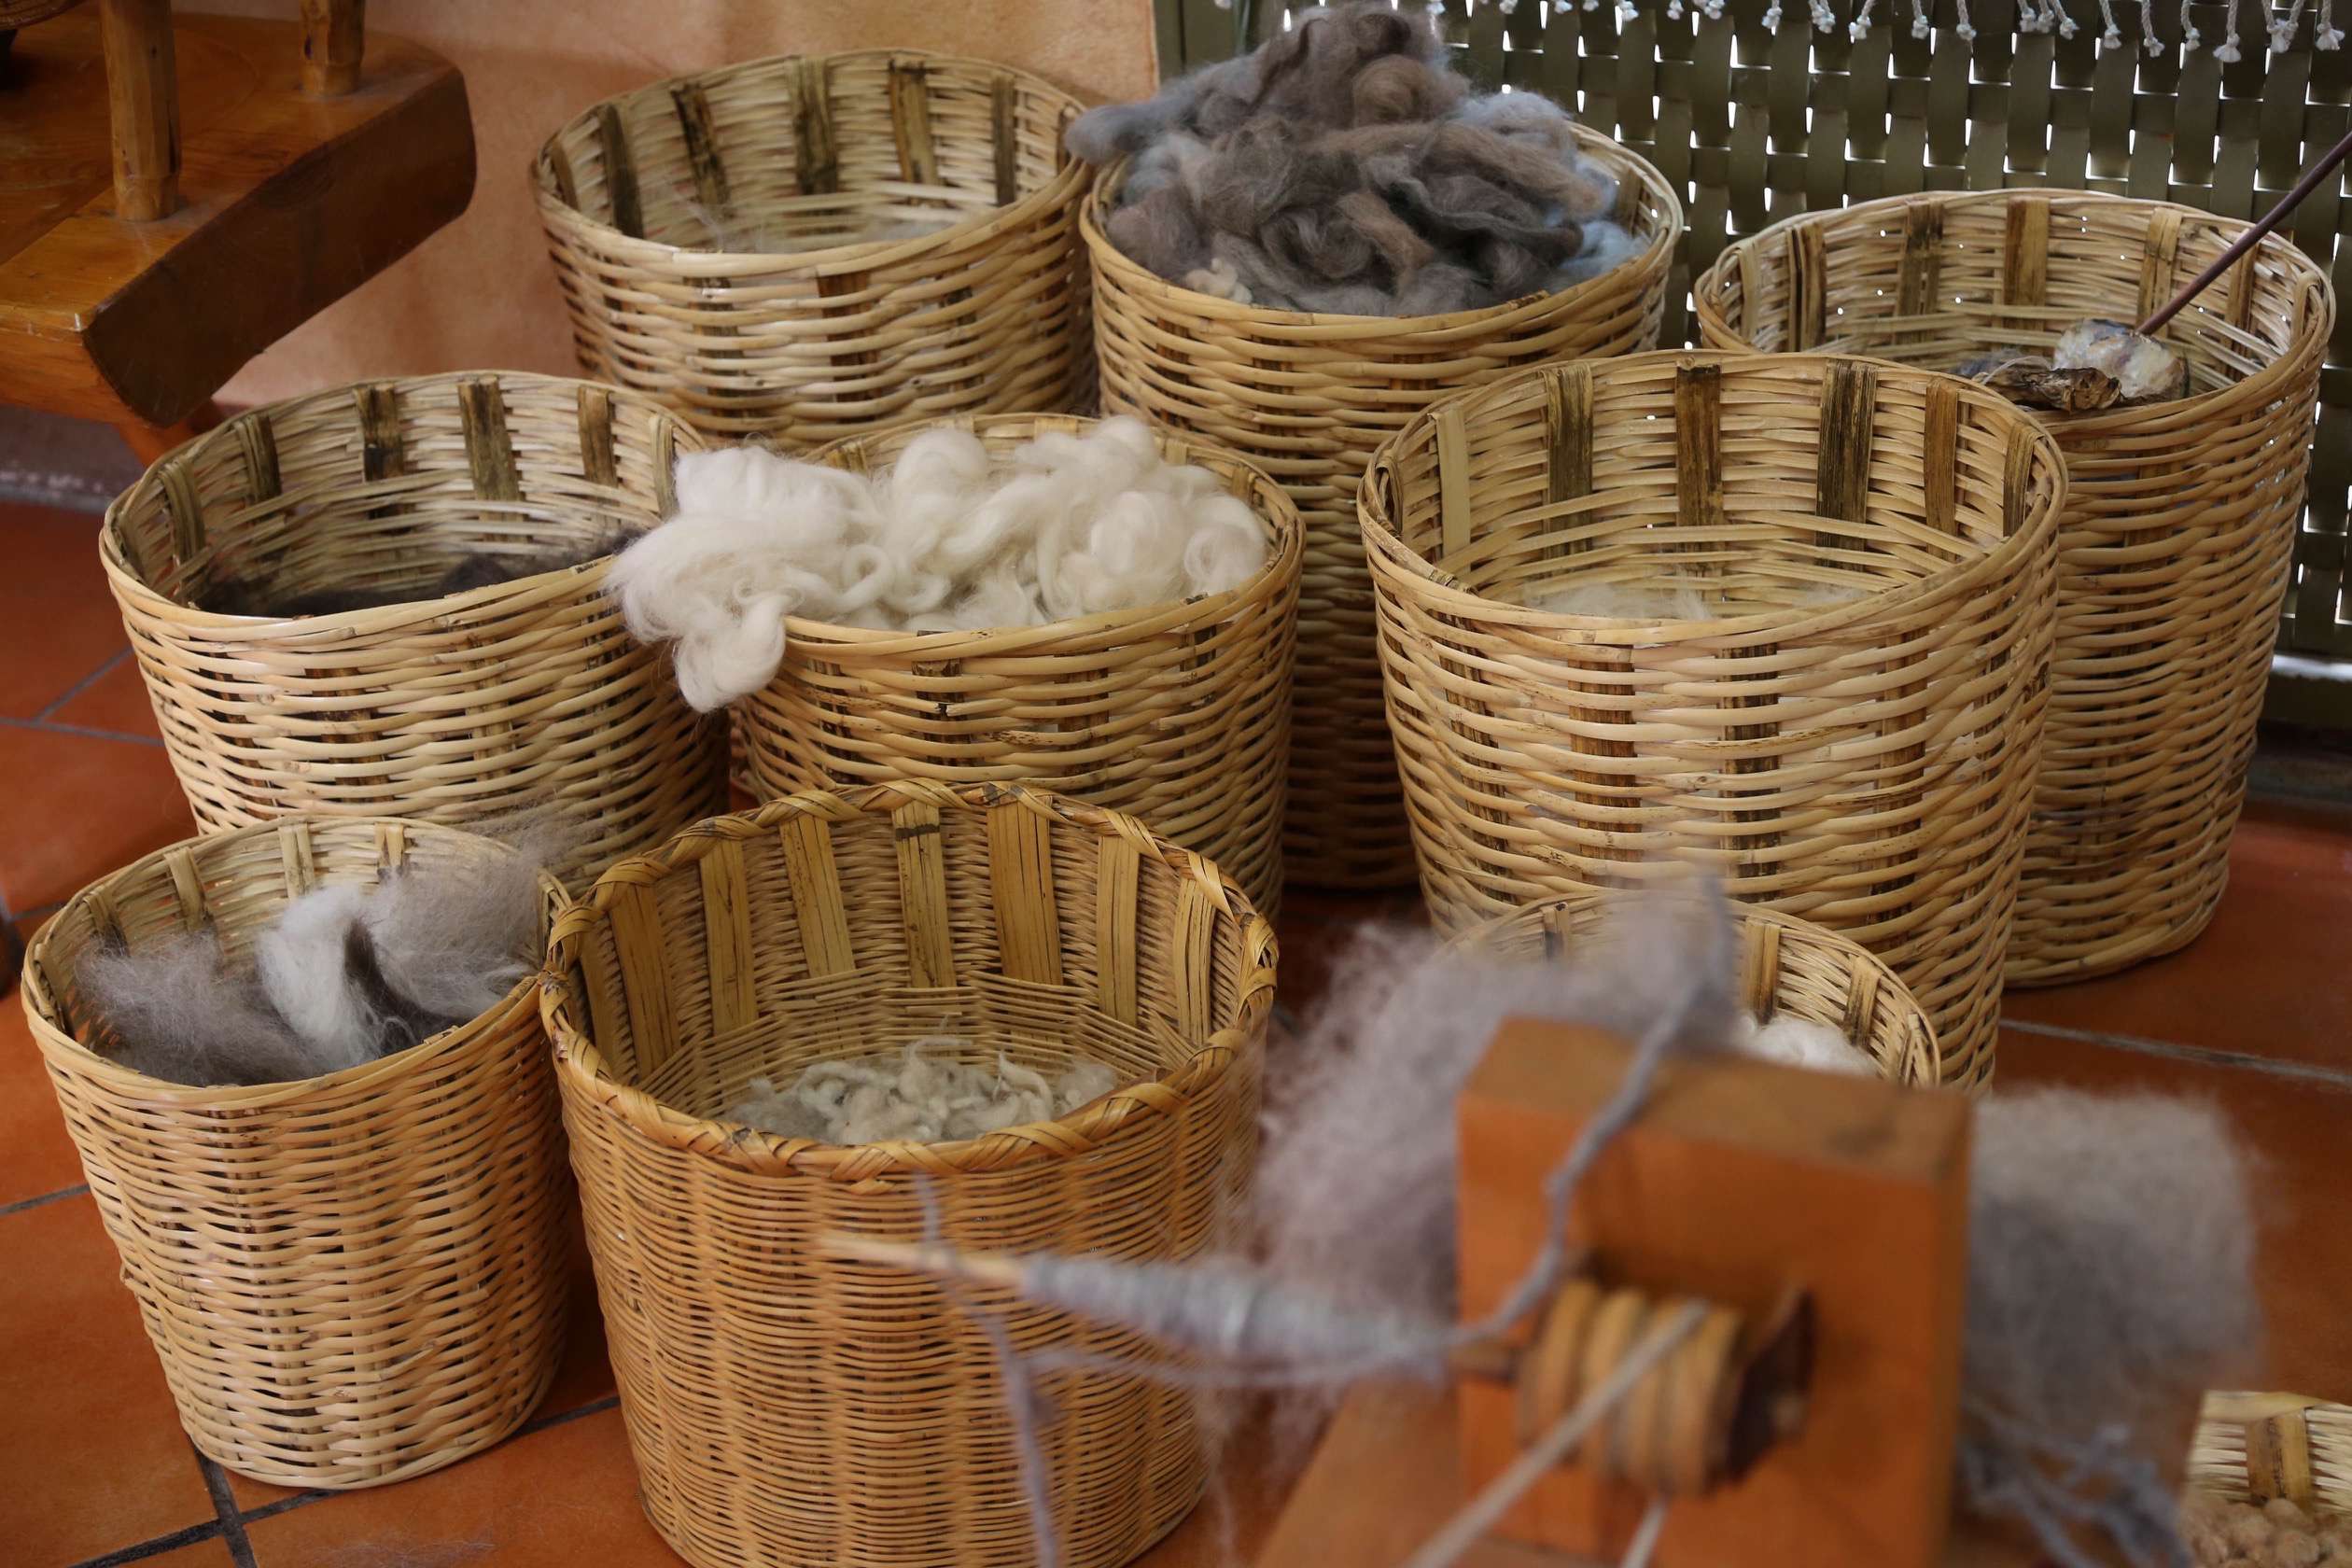 These baskets show the nearly 10 different types of wool, sourced from Mexico and South America that go into this cooperative's rugs.